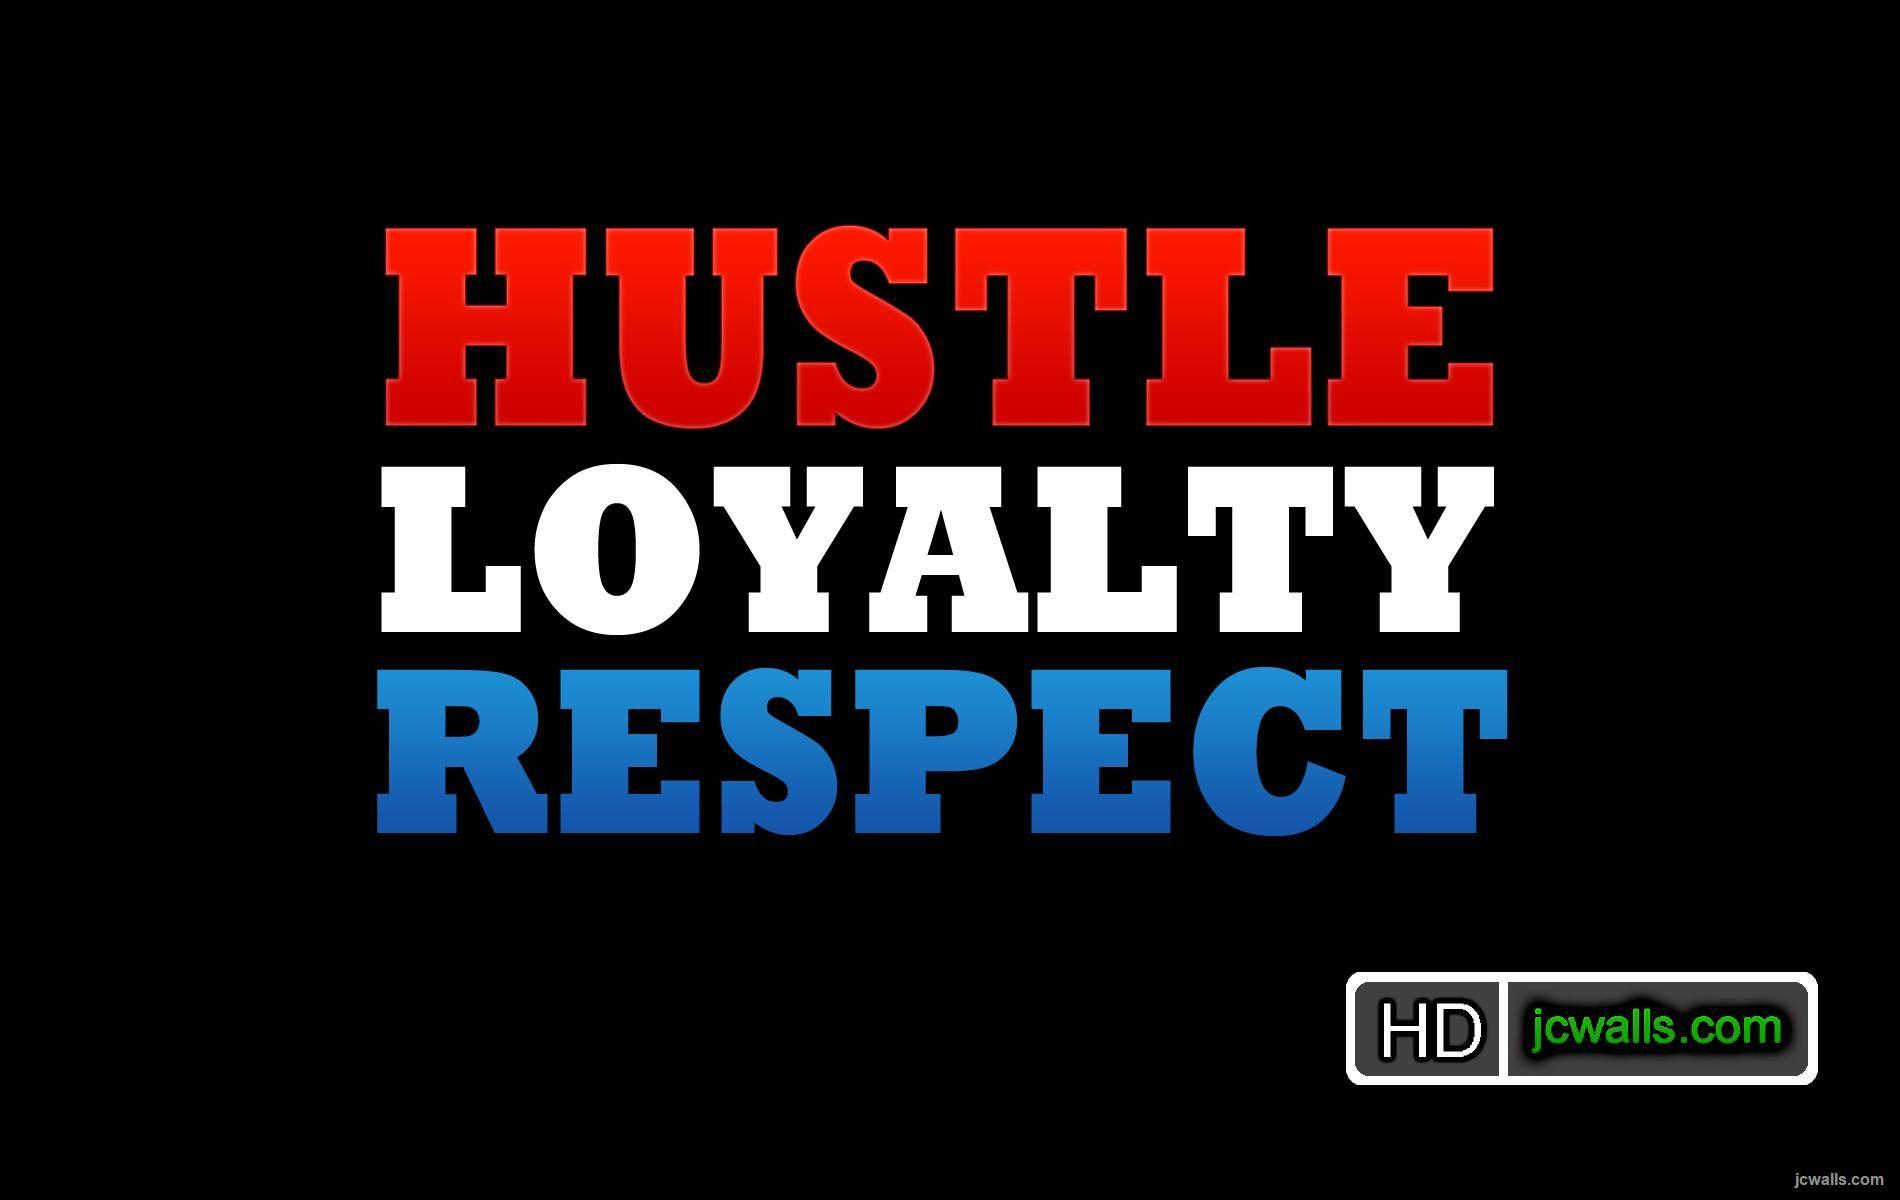 Loyalty Wallpapers  Top Free Loyalty Backgrounds  WallpaperAccess